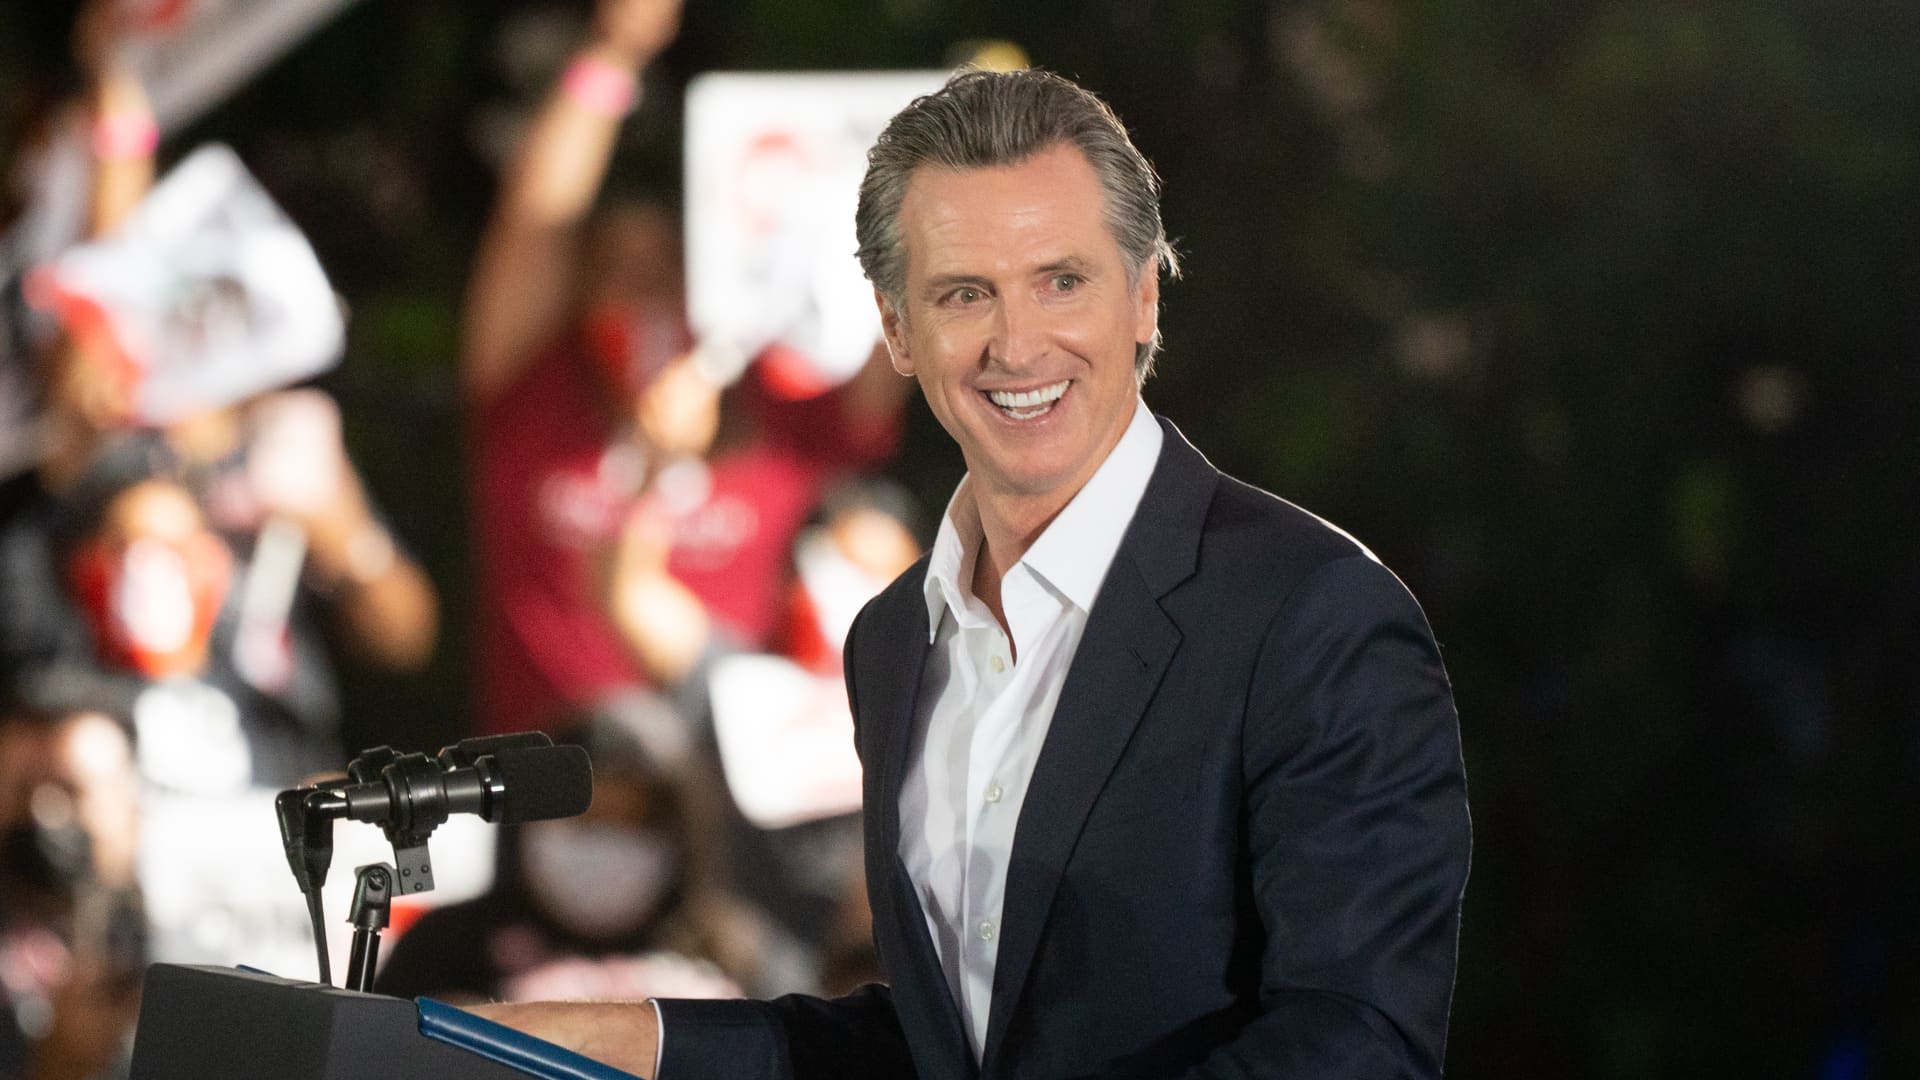 Gavin Newsom, governor of California, speaks during a campaign event at Long Beach City College in Long Beach, California, U.S., on Monday, Sept. 13, 2021.